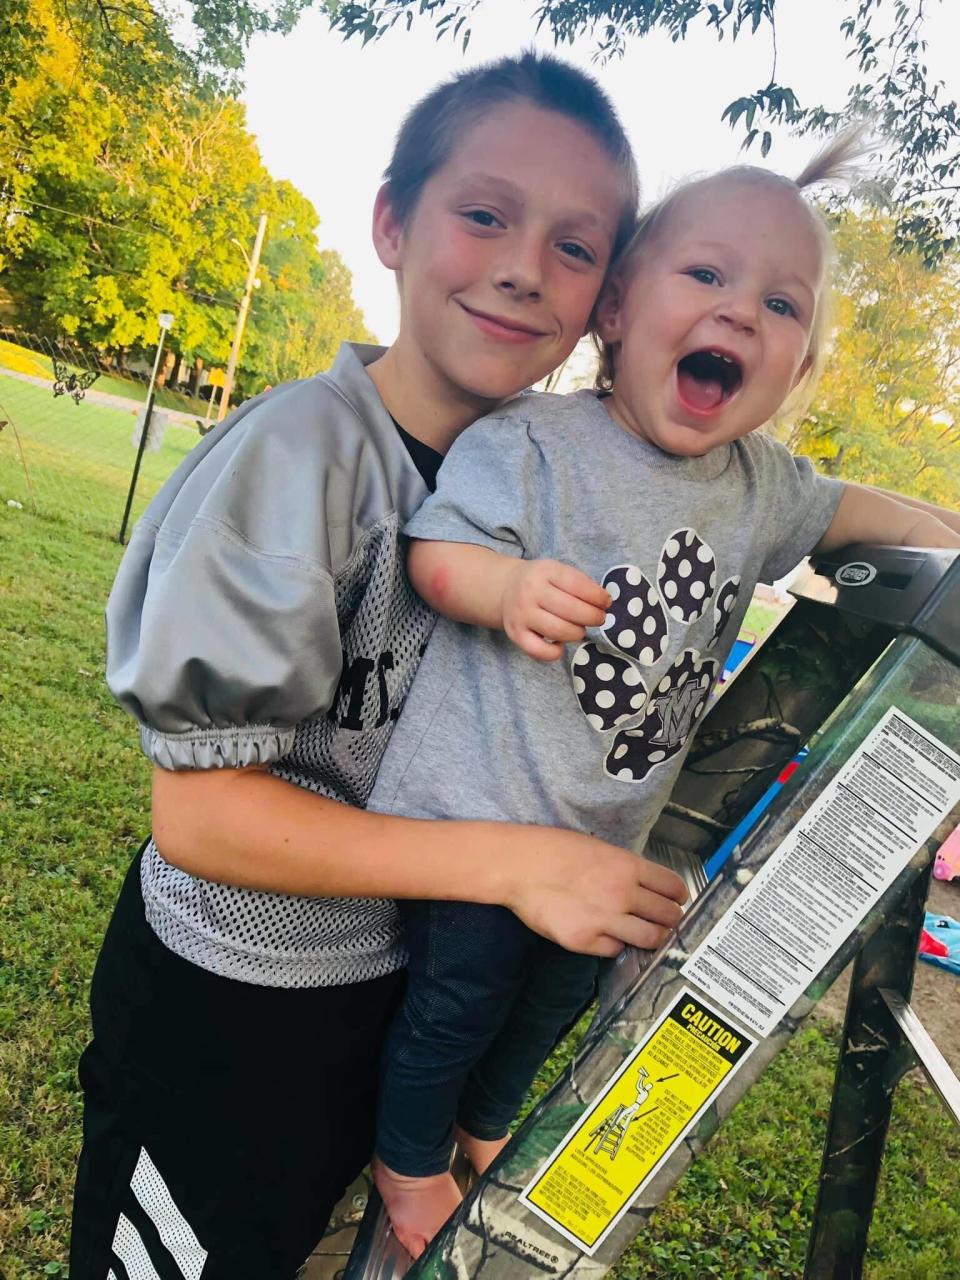 Camrynn Ray McMichael, pictured with his sister Karmynn Louise, died in a fireworks accident in Indiana. (Courtesy of Kyrra Lynn)